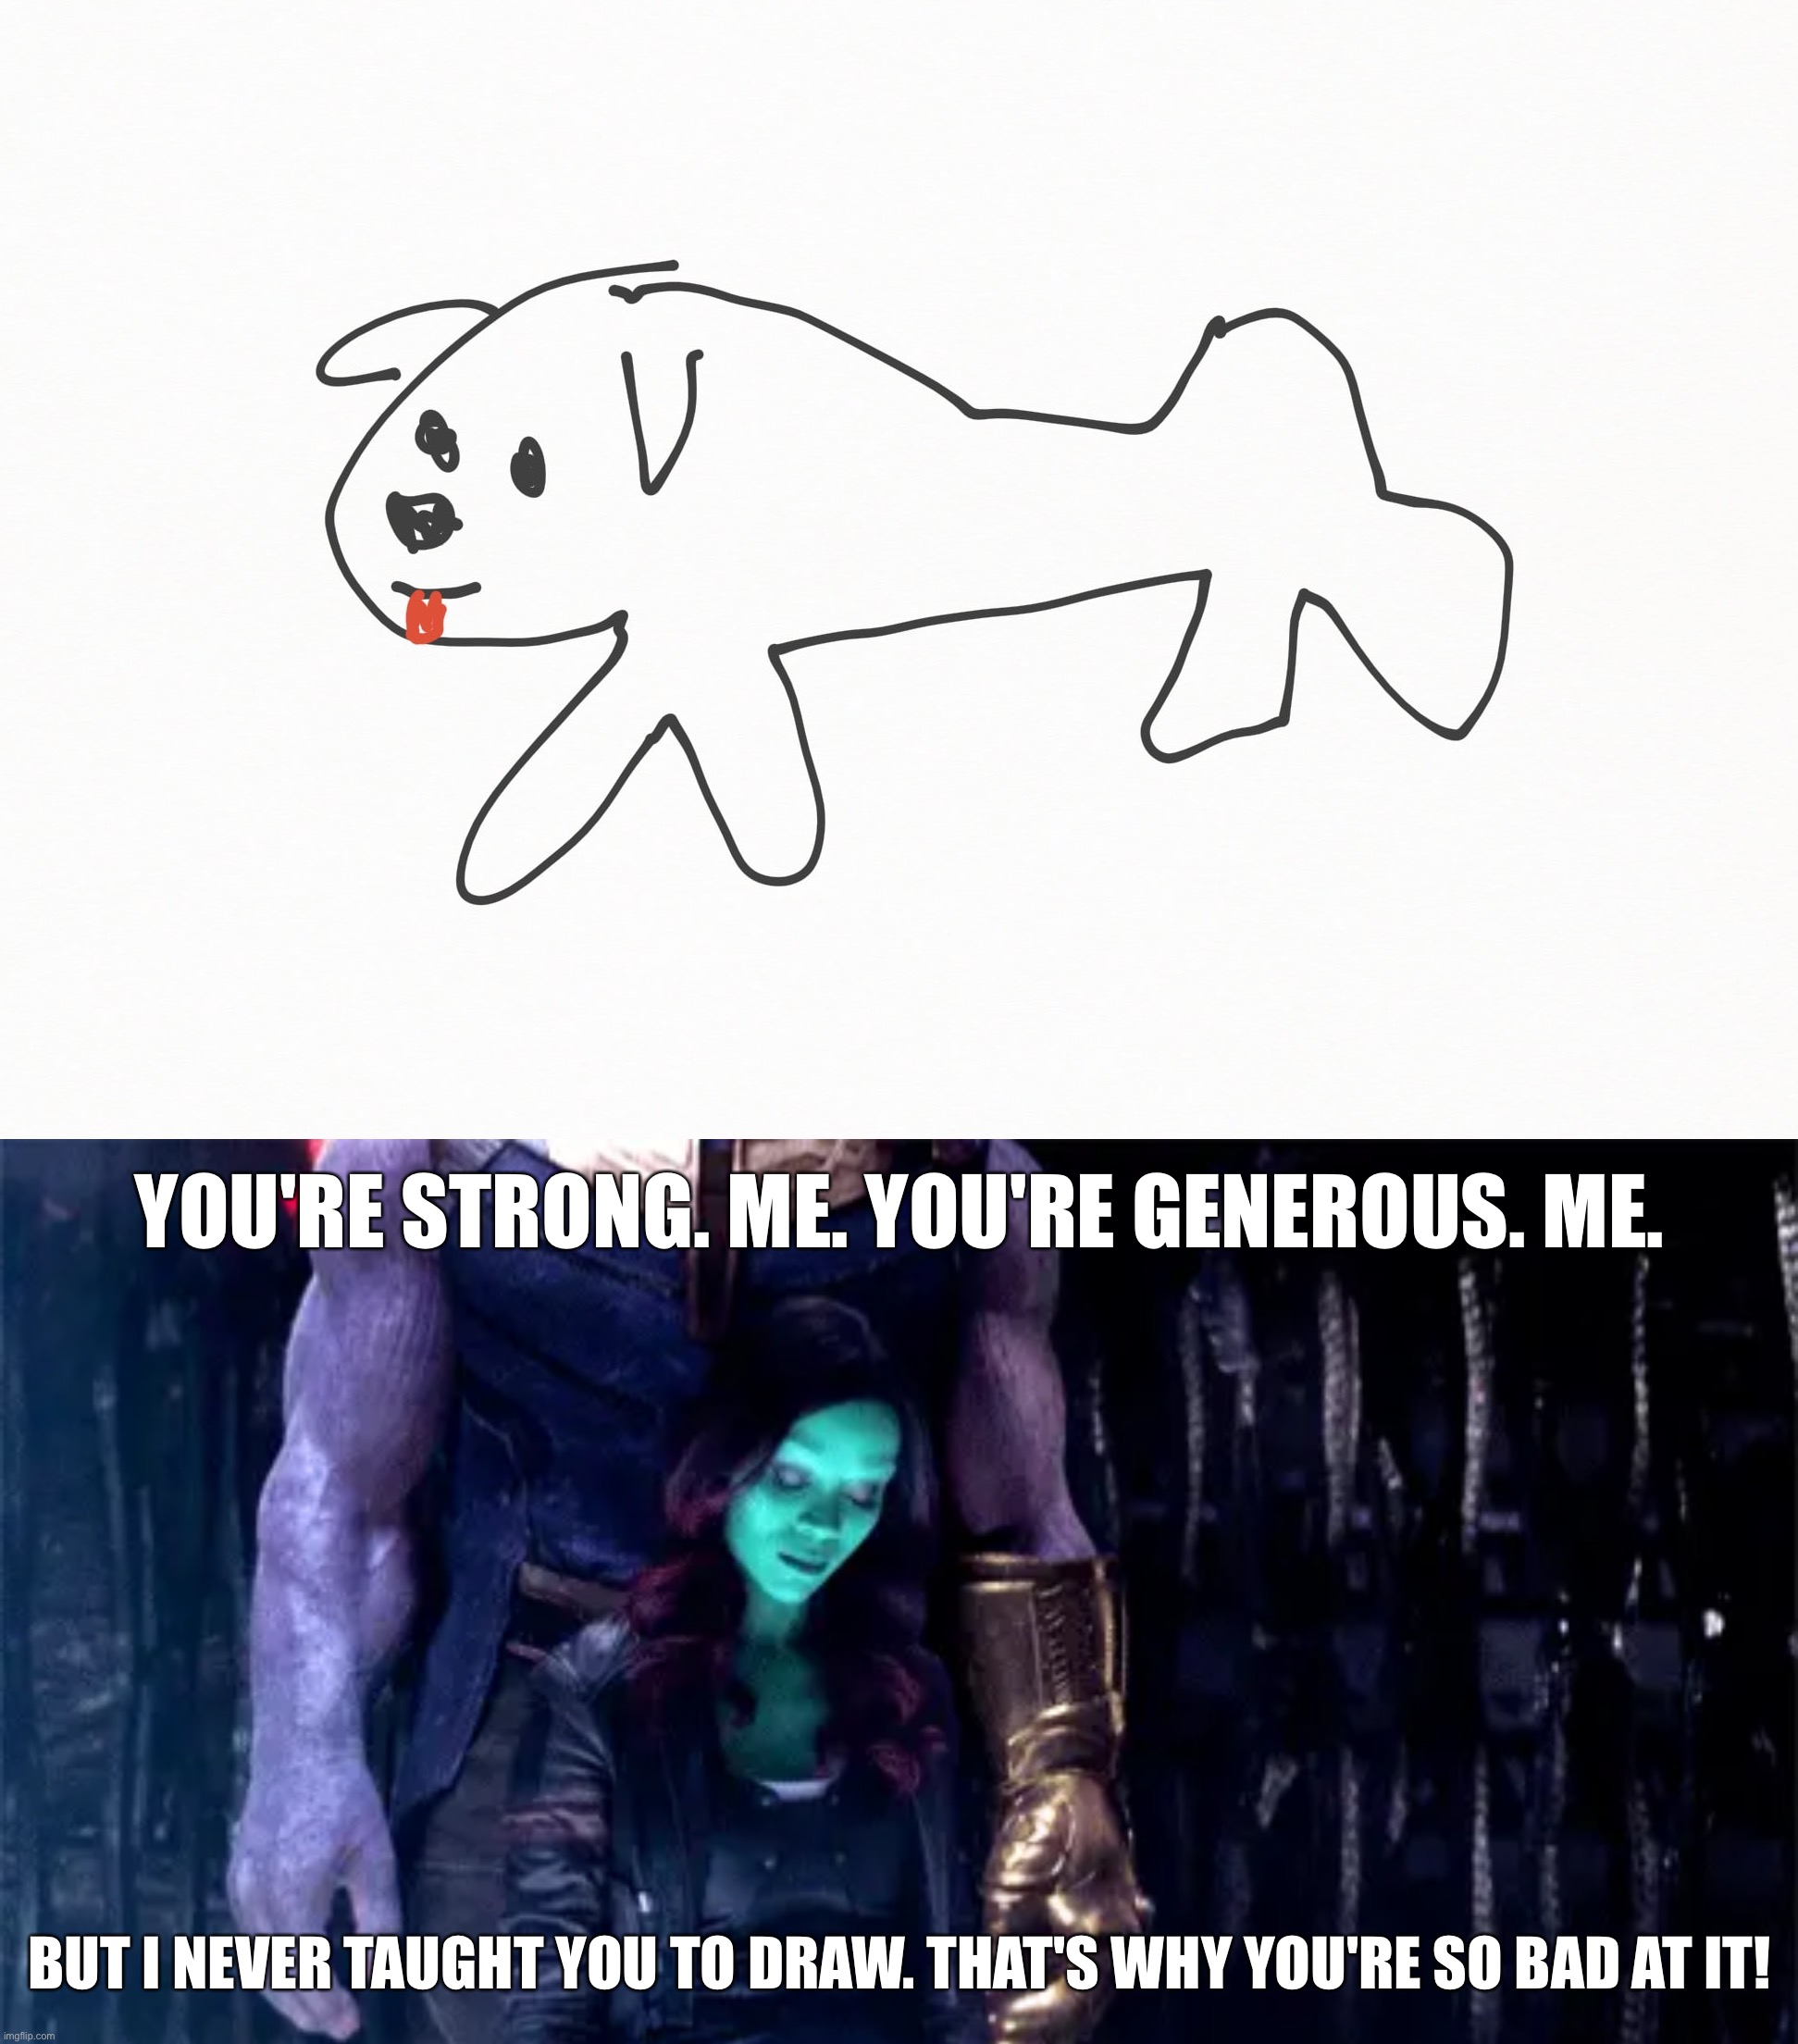 YOU'RE STRONG. ME. YOU'RE GENEROUS. ME. BUT I NEVER TAUGHT YOU TO DRAW. THAT'S WHY YOU'RE SO BAD AT IT! | image tagged in memes,thanos,avengers infinity war | made w/ Imgflip meme maker